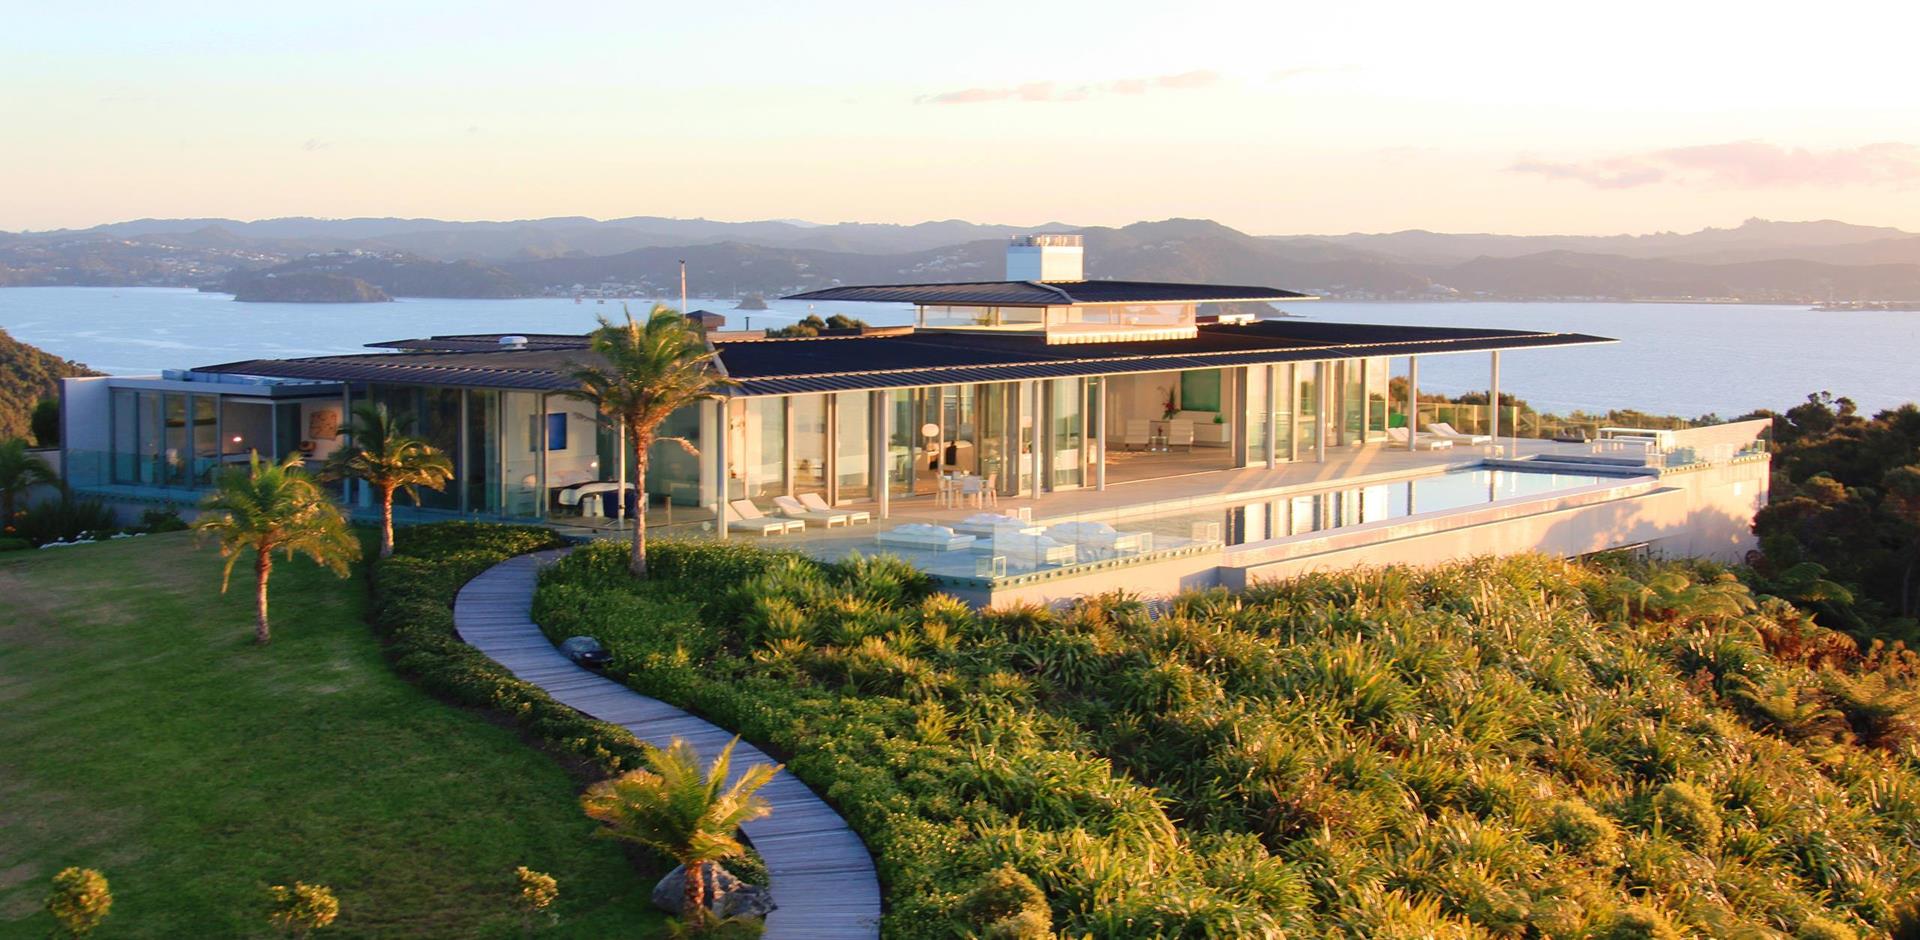 Pool and exterior, Eagles Nest, New Zealand